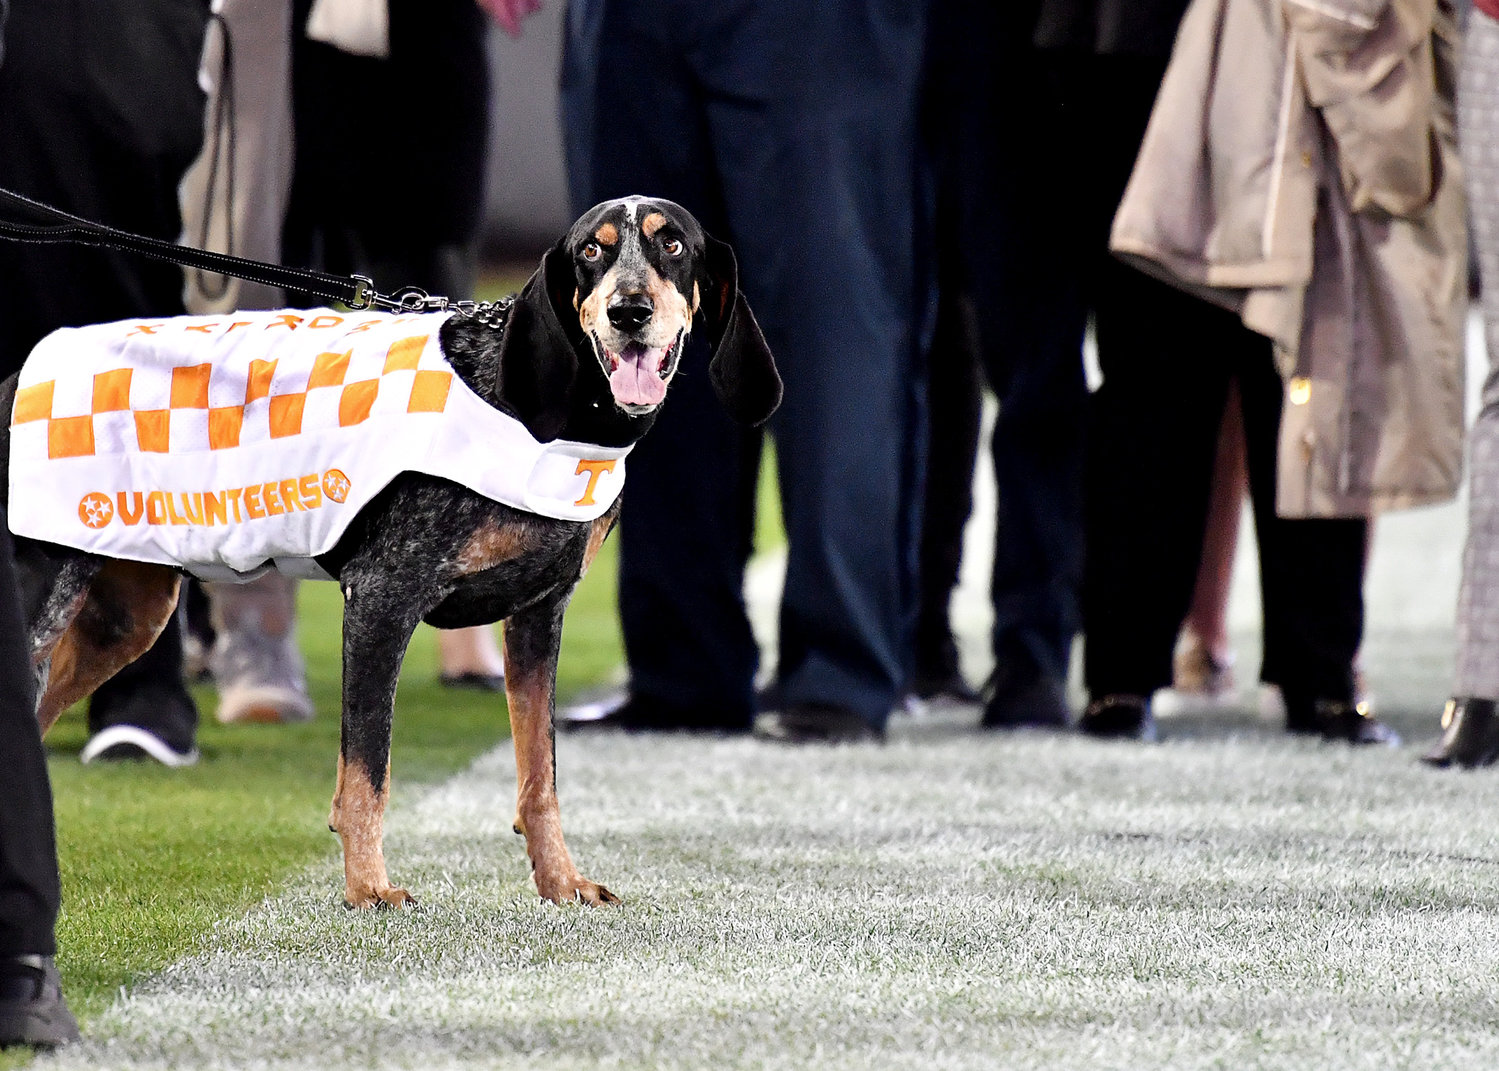 Tennessee Volunteers mascot, Smokey, watches pregame ceremonies for the Gator Bowl NCAA football game between the Indiana Hoosiers and the Tennessee Volunteers Thursday, January 2, 2020, at TIAA Bank Field in Jacksonville, Fla.